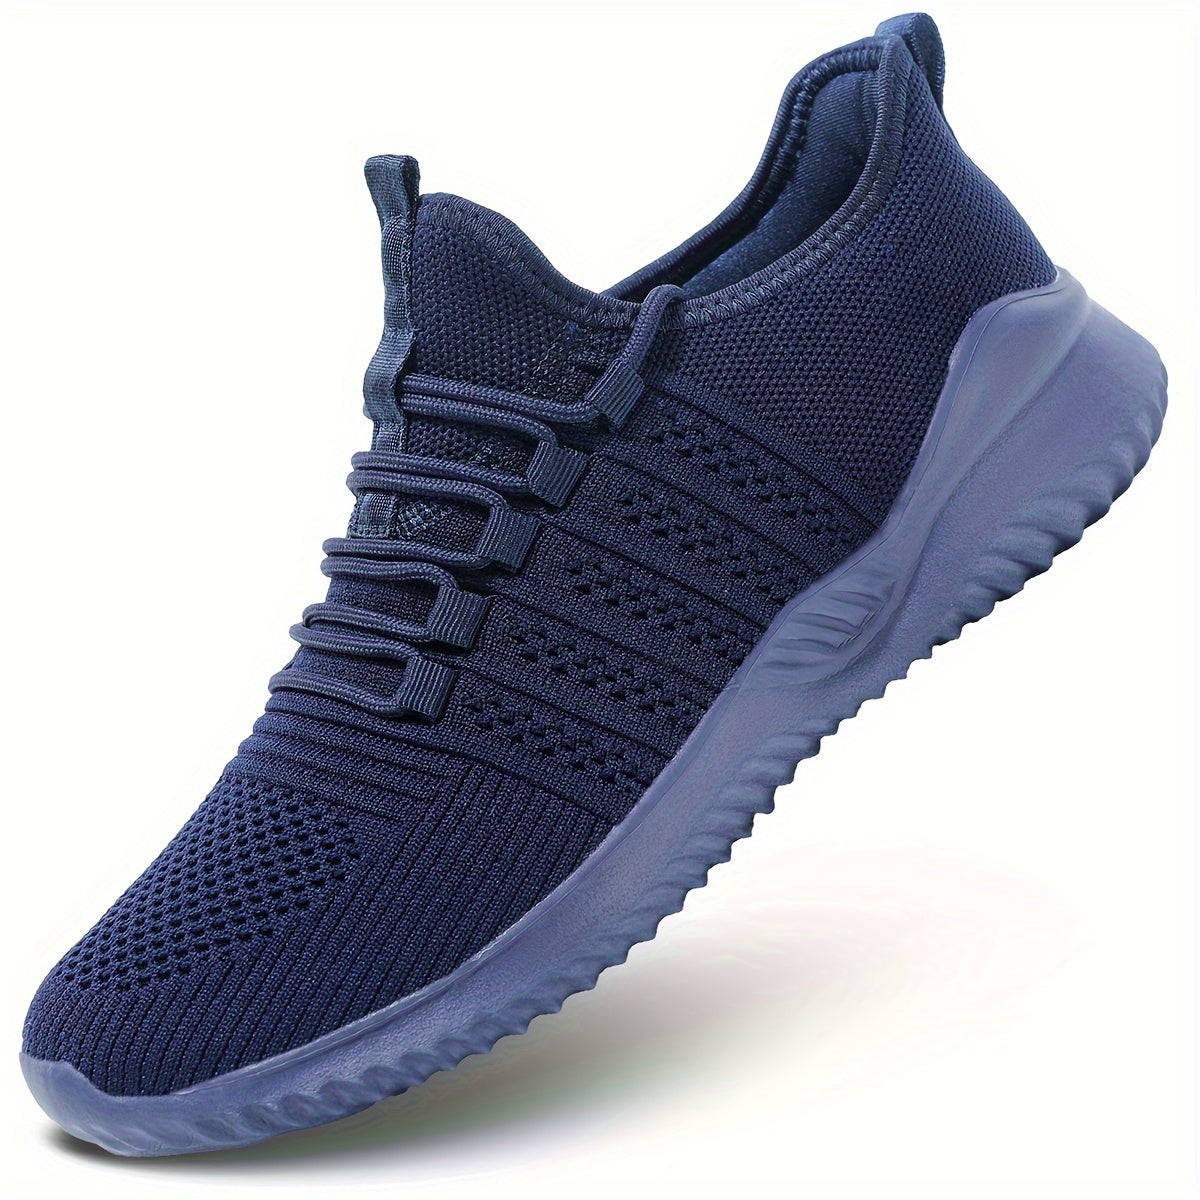 Men's Casual Sneakers, Breathable Lace-up Shoes With Fabric Uppers For Outdoor Walking Running, Spring Summer Autumn